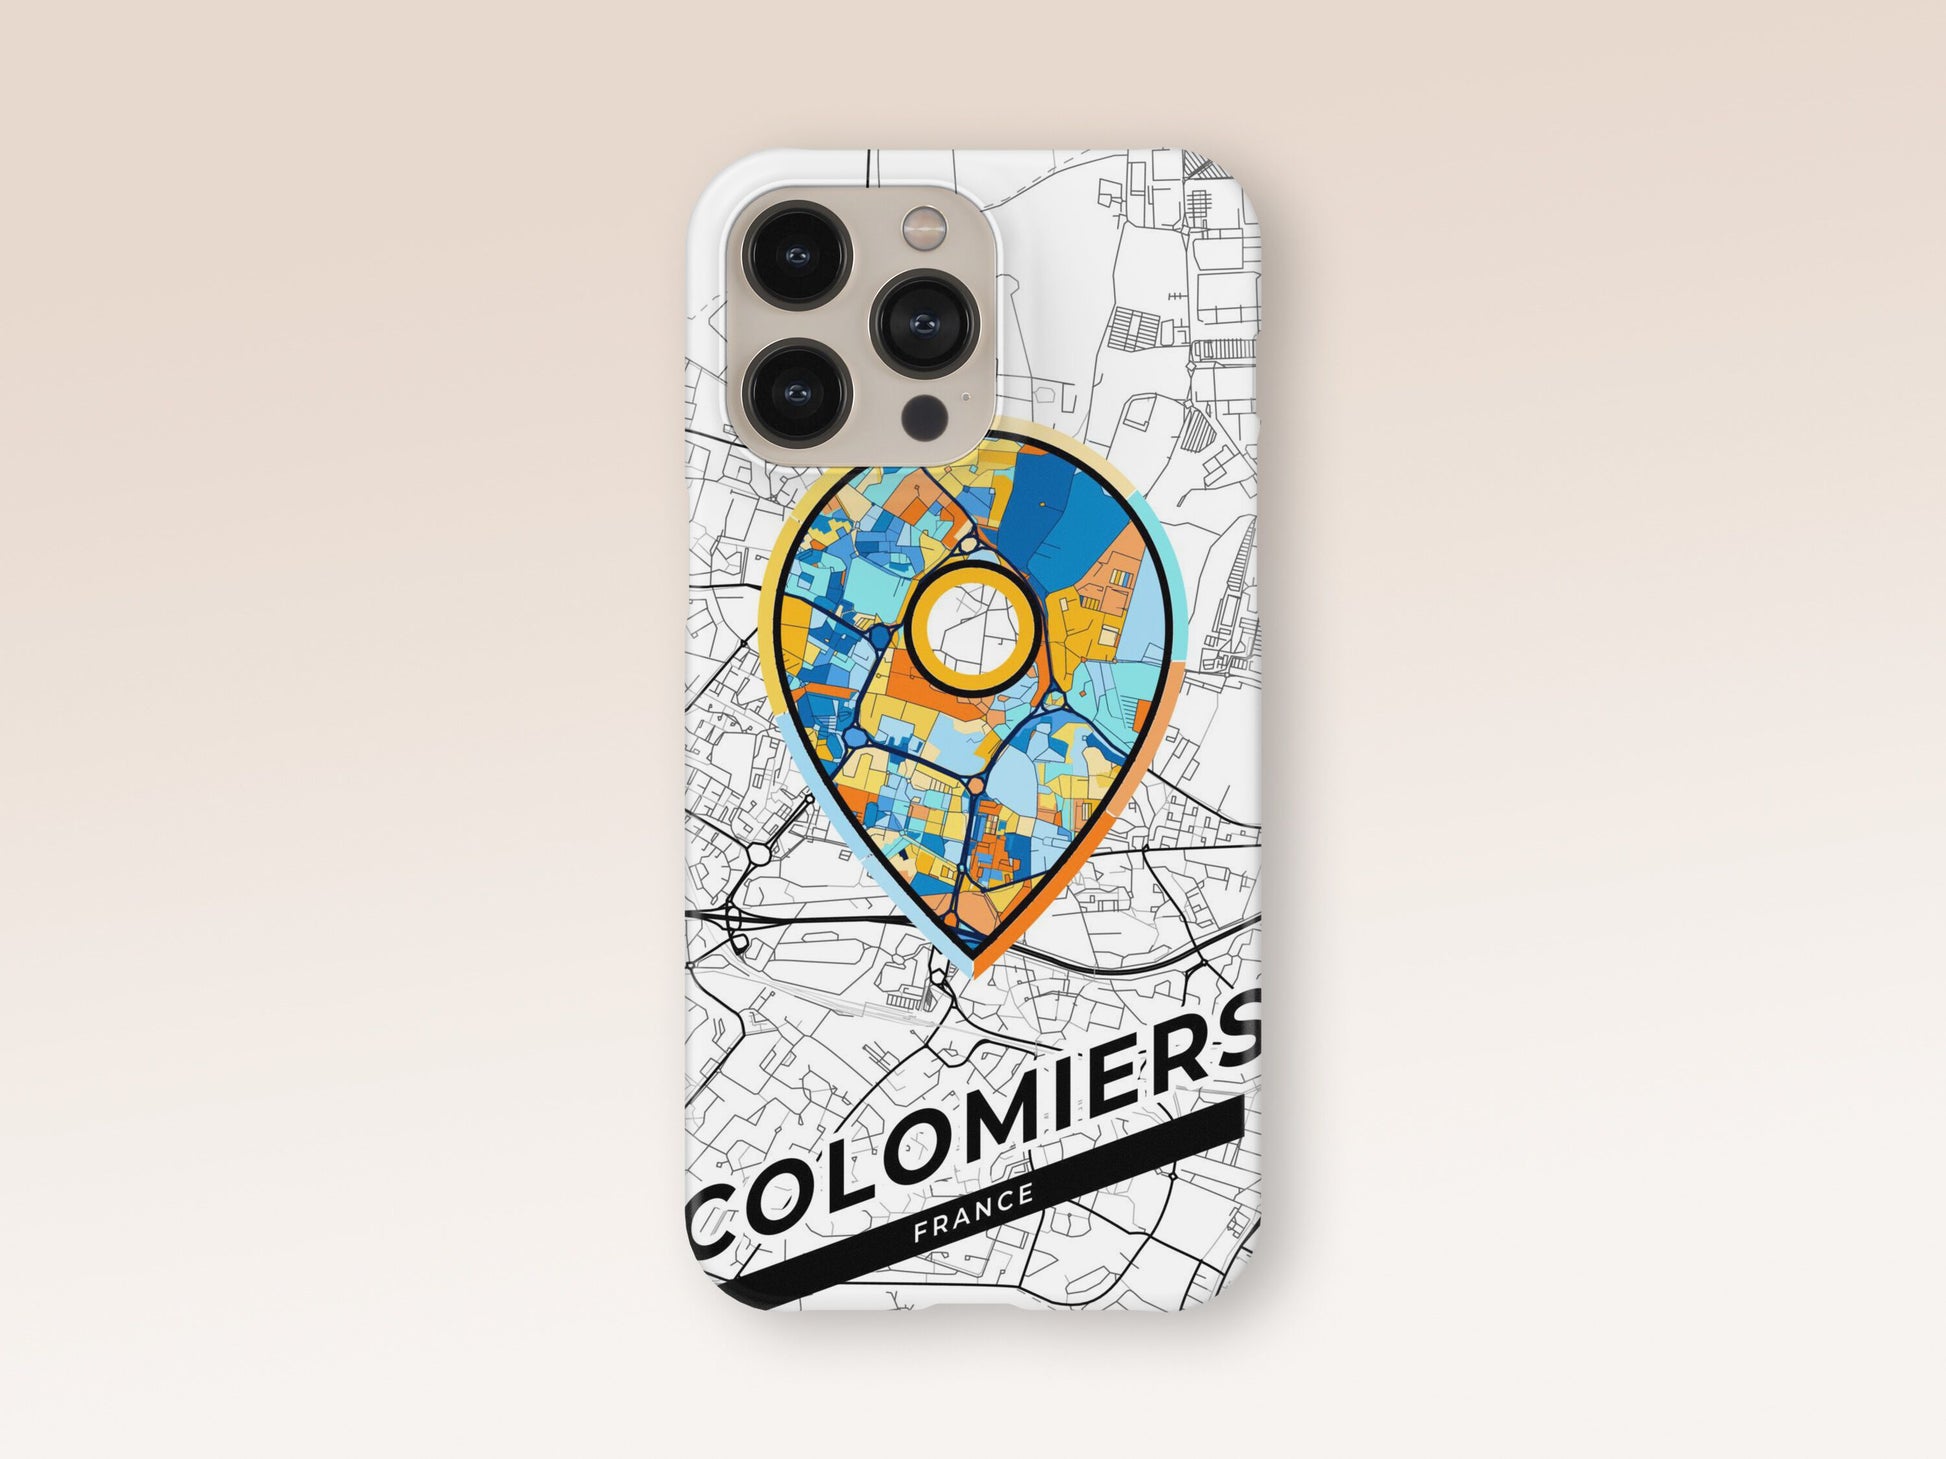 Colomiers France slim phone case with colorful icon. Birthday, wedding or housewarming gift. Couple match cases. 1